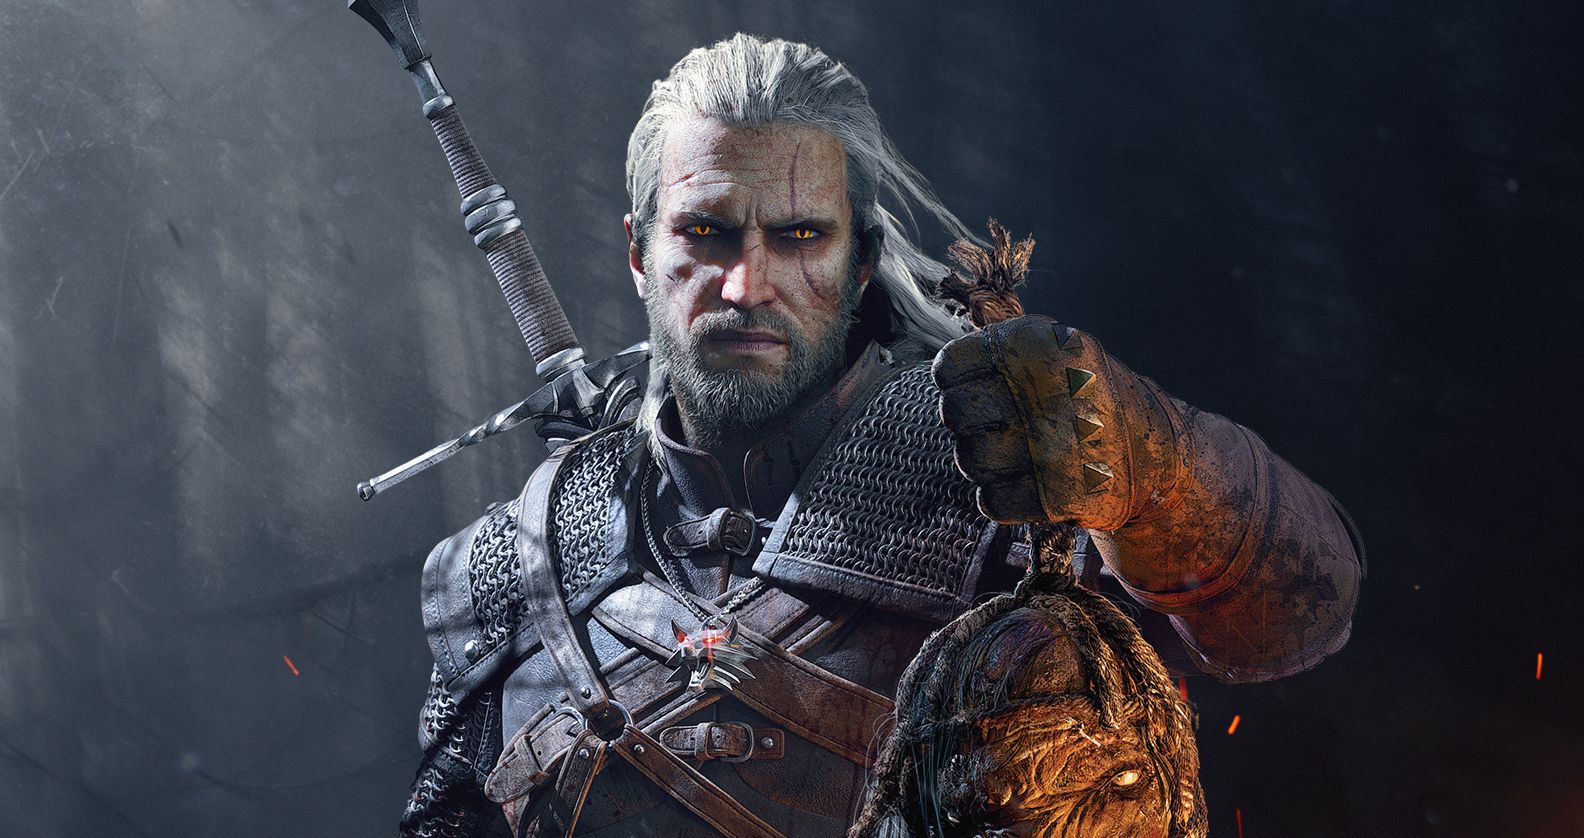 Image for The Witcher 3: Wild Hunt is coming to PS5 and Xbox Series X, free to existing owners